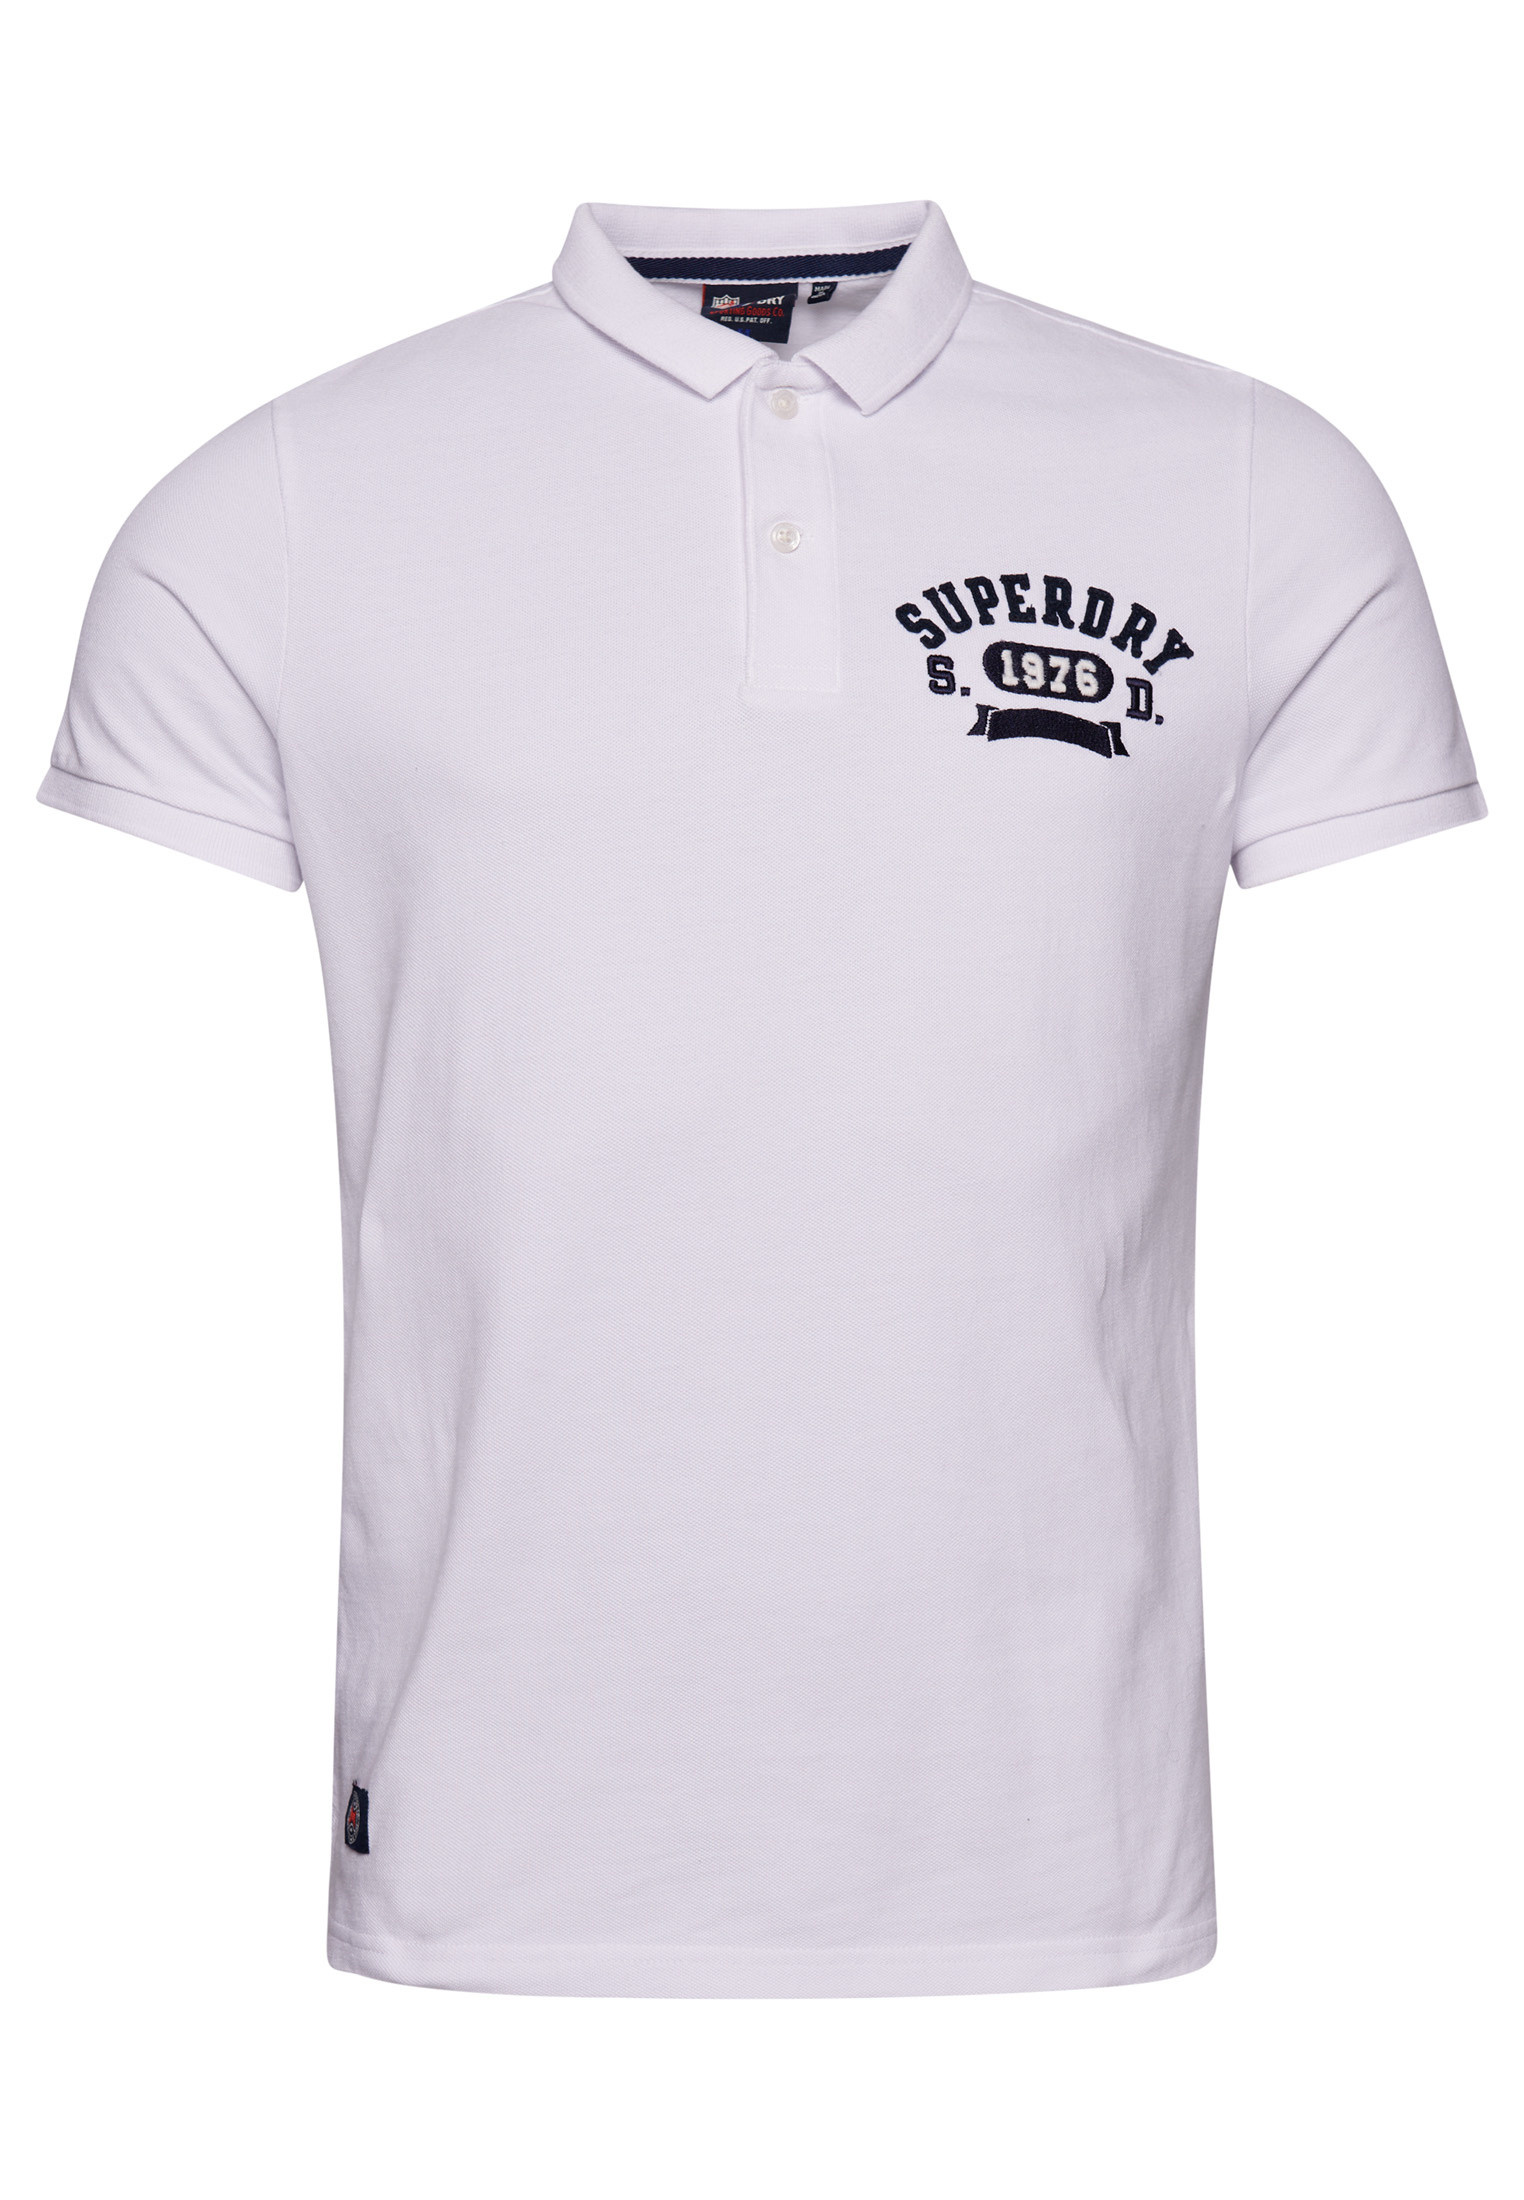 Superdry - Cotton piqué polo shirt with logo, White, large image number 0